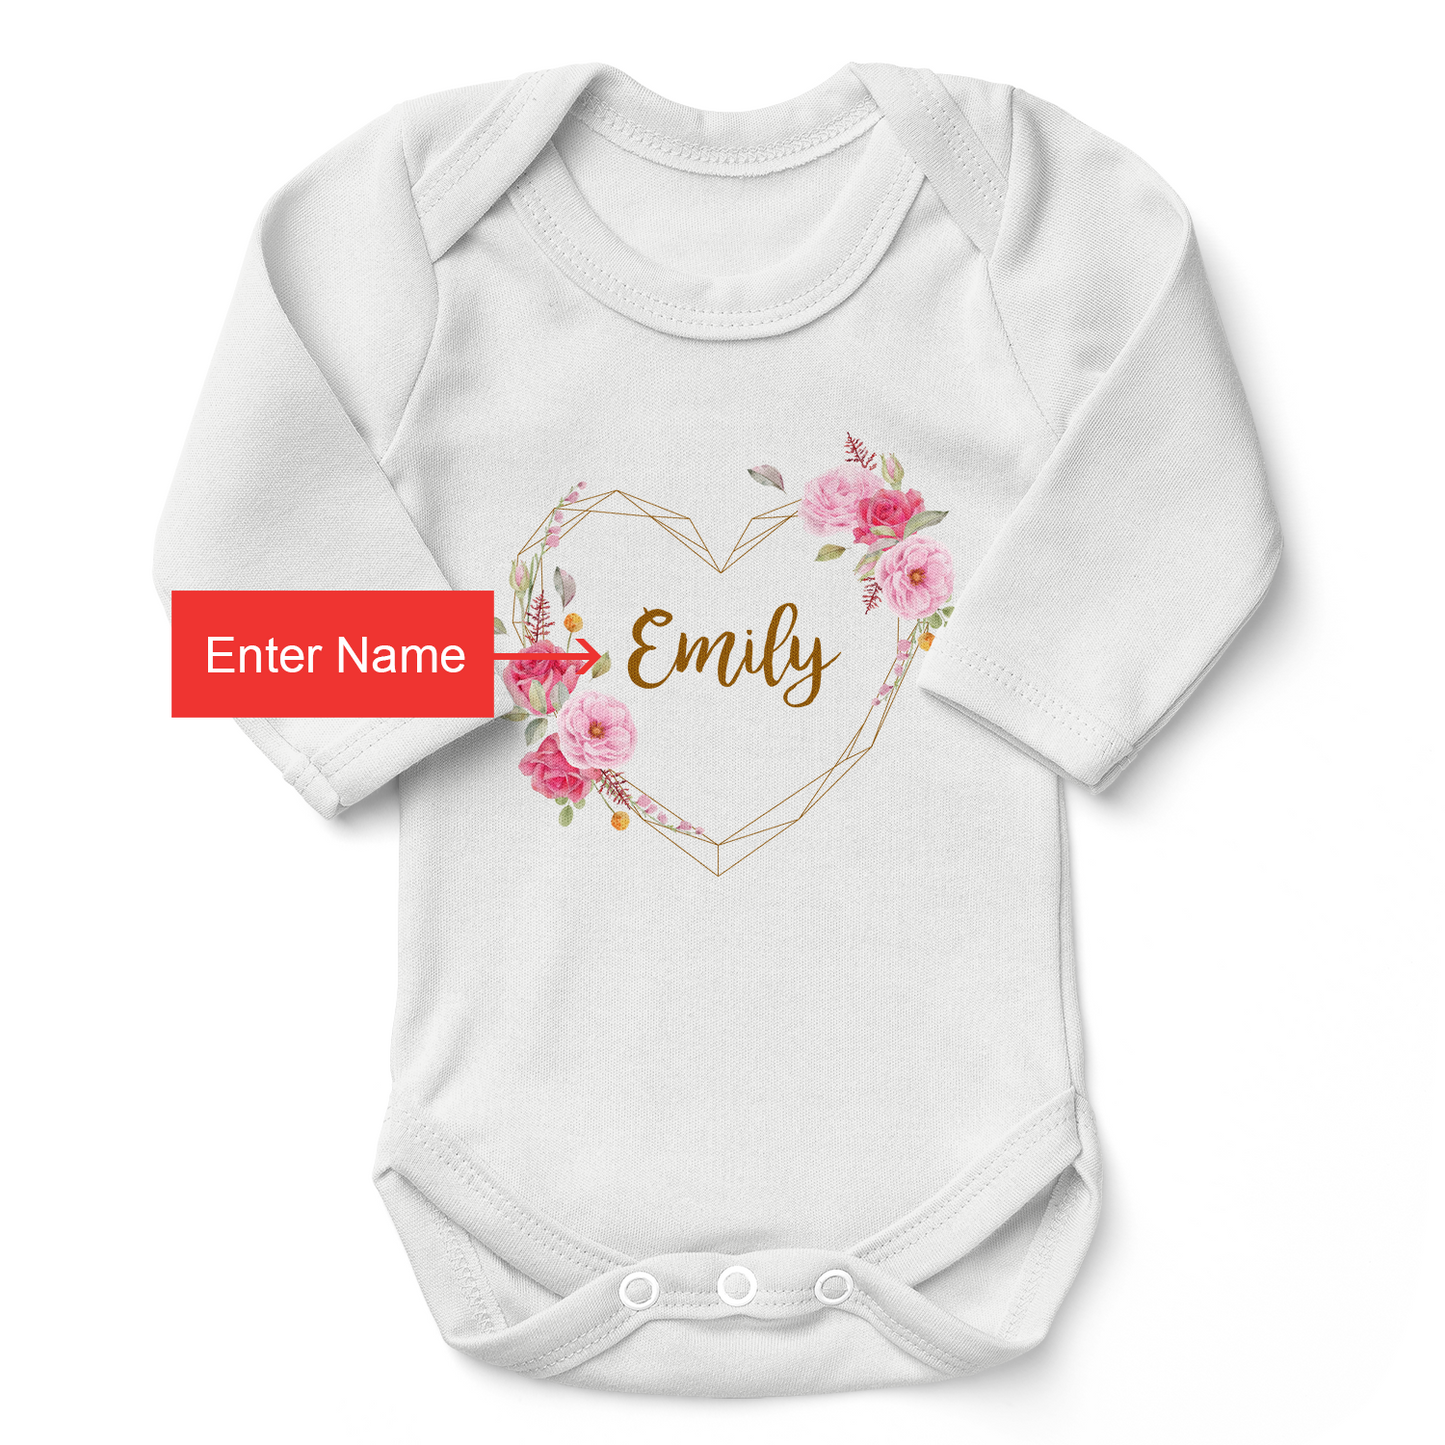 [Personalized] Endanzoo Organic Long Sleeve Baby Bodysuit - Floral Love